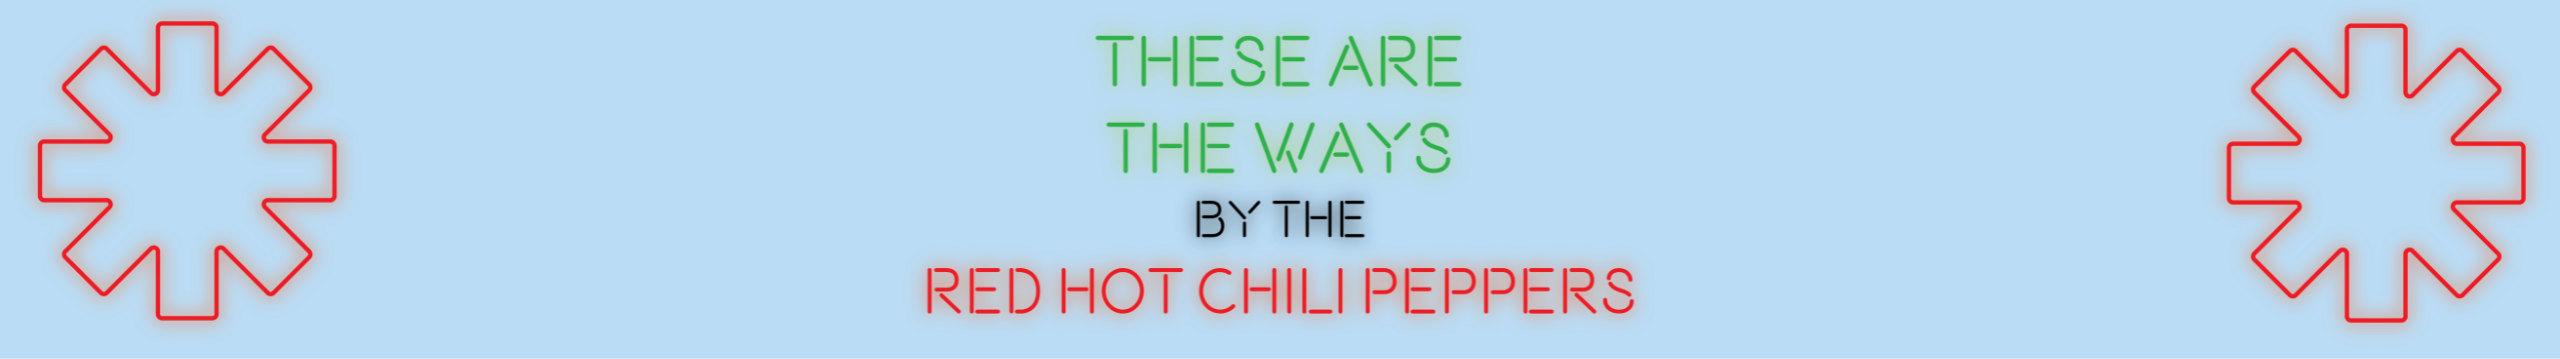 Pick of the Week: Red Hot Chili Peppers "These Are The Ways"